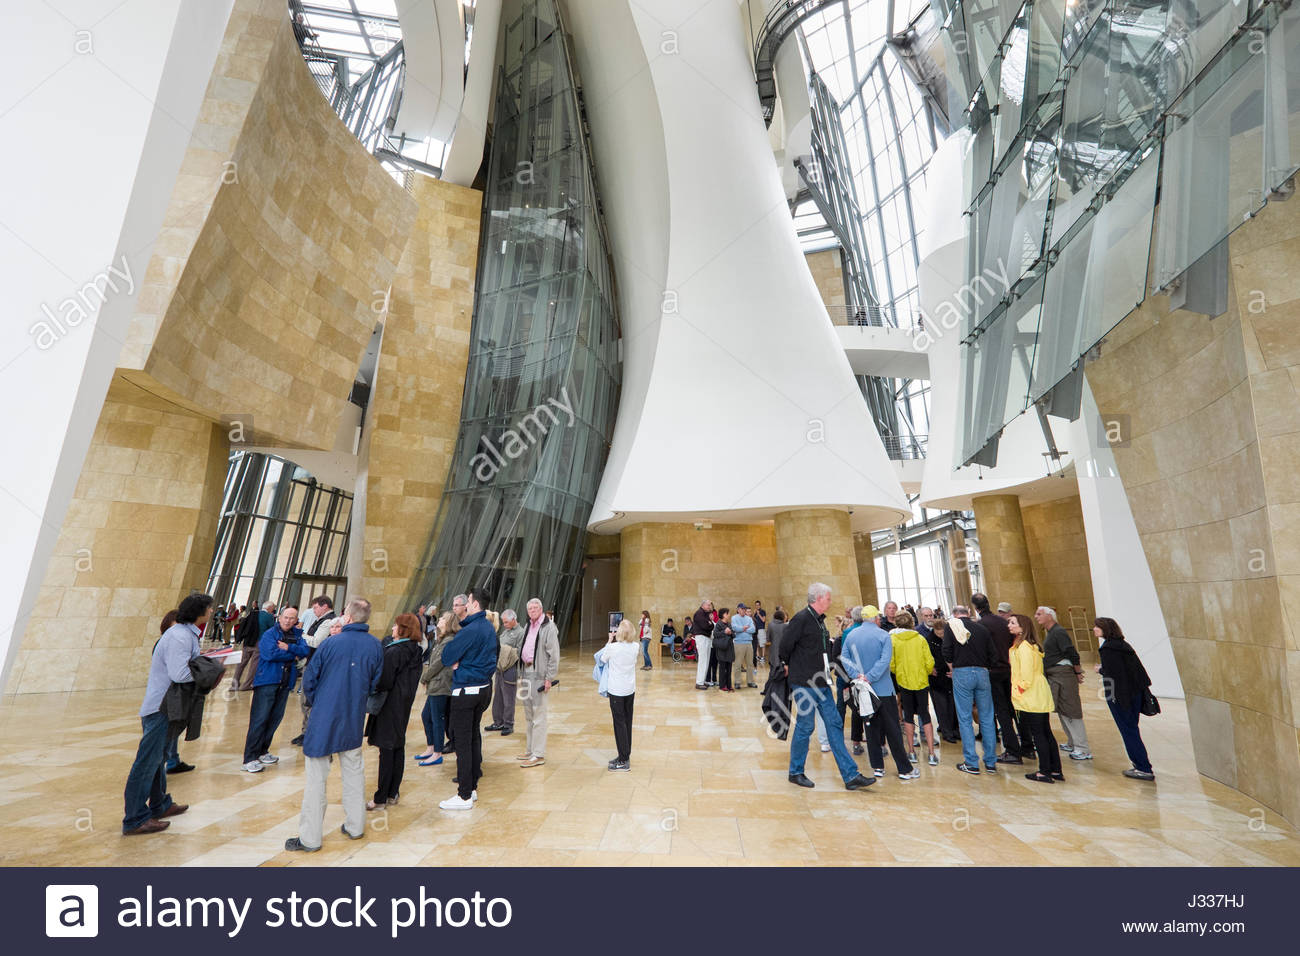 Groups Of People Inside The Central Atrium Of The Guggenheim